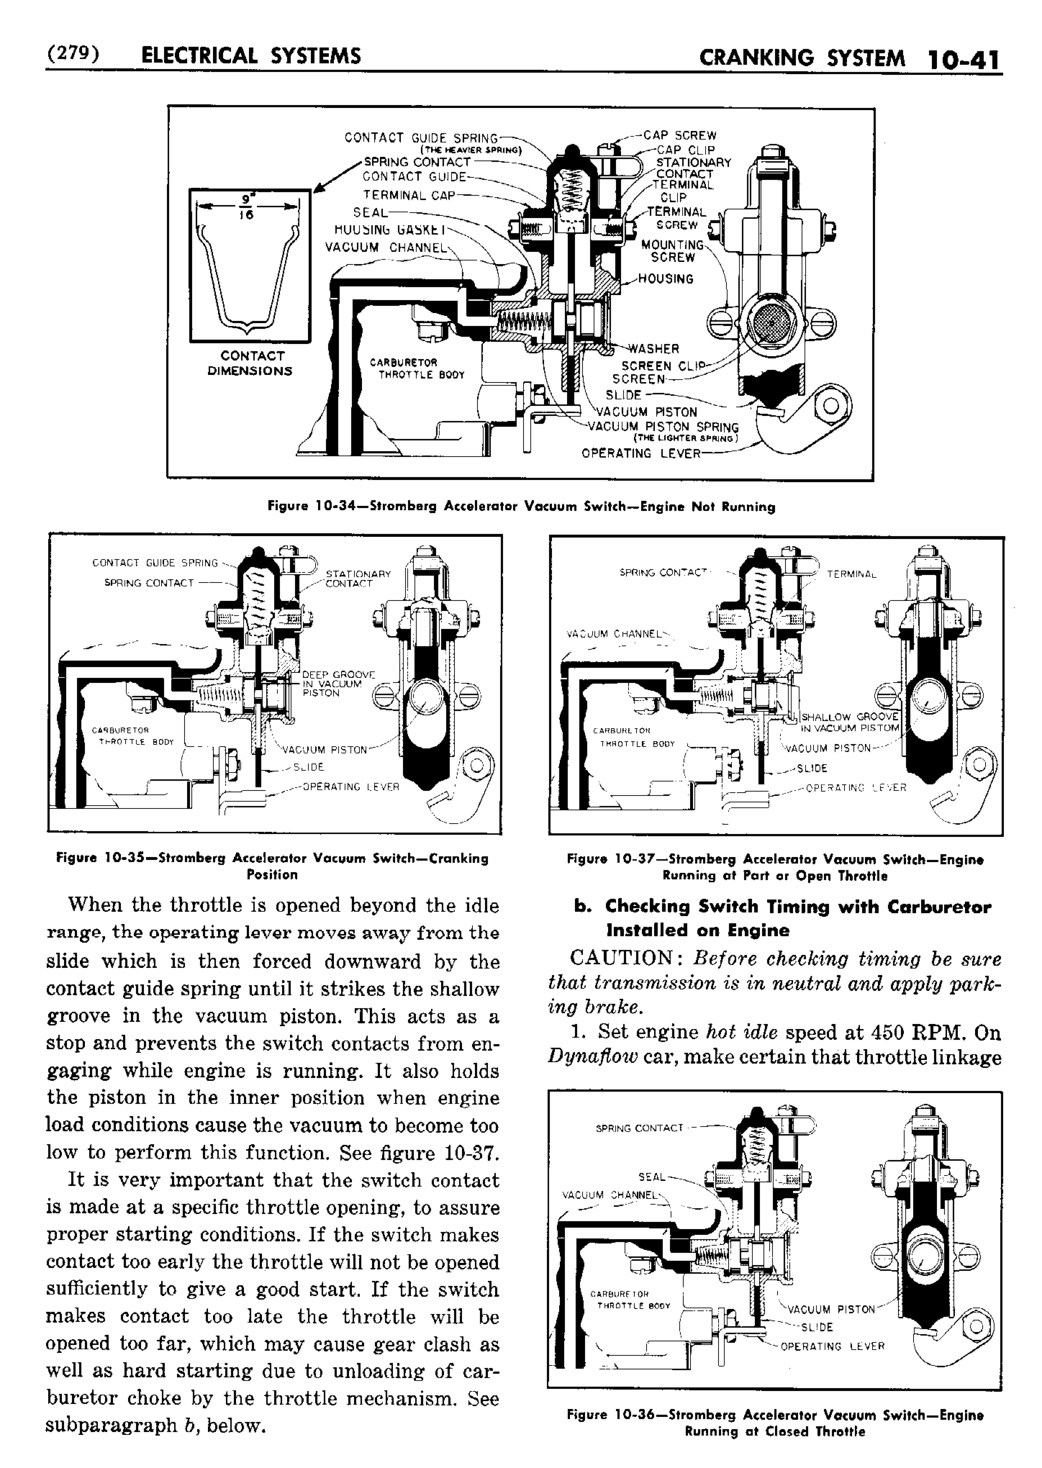 n_11 1950 Buick Shop Manual - Electrical Systems-041-041.jpg